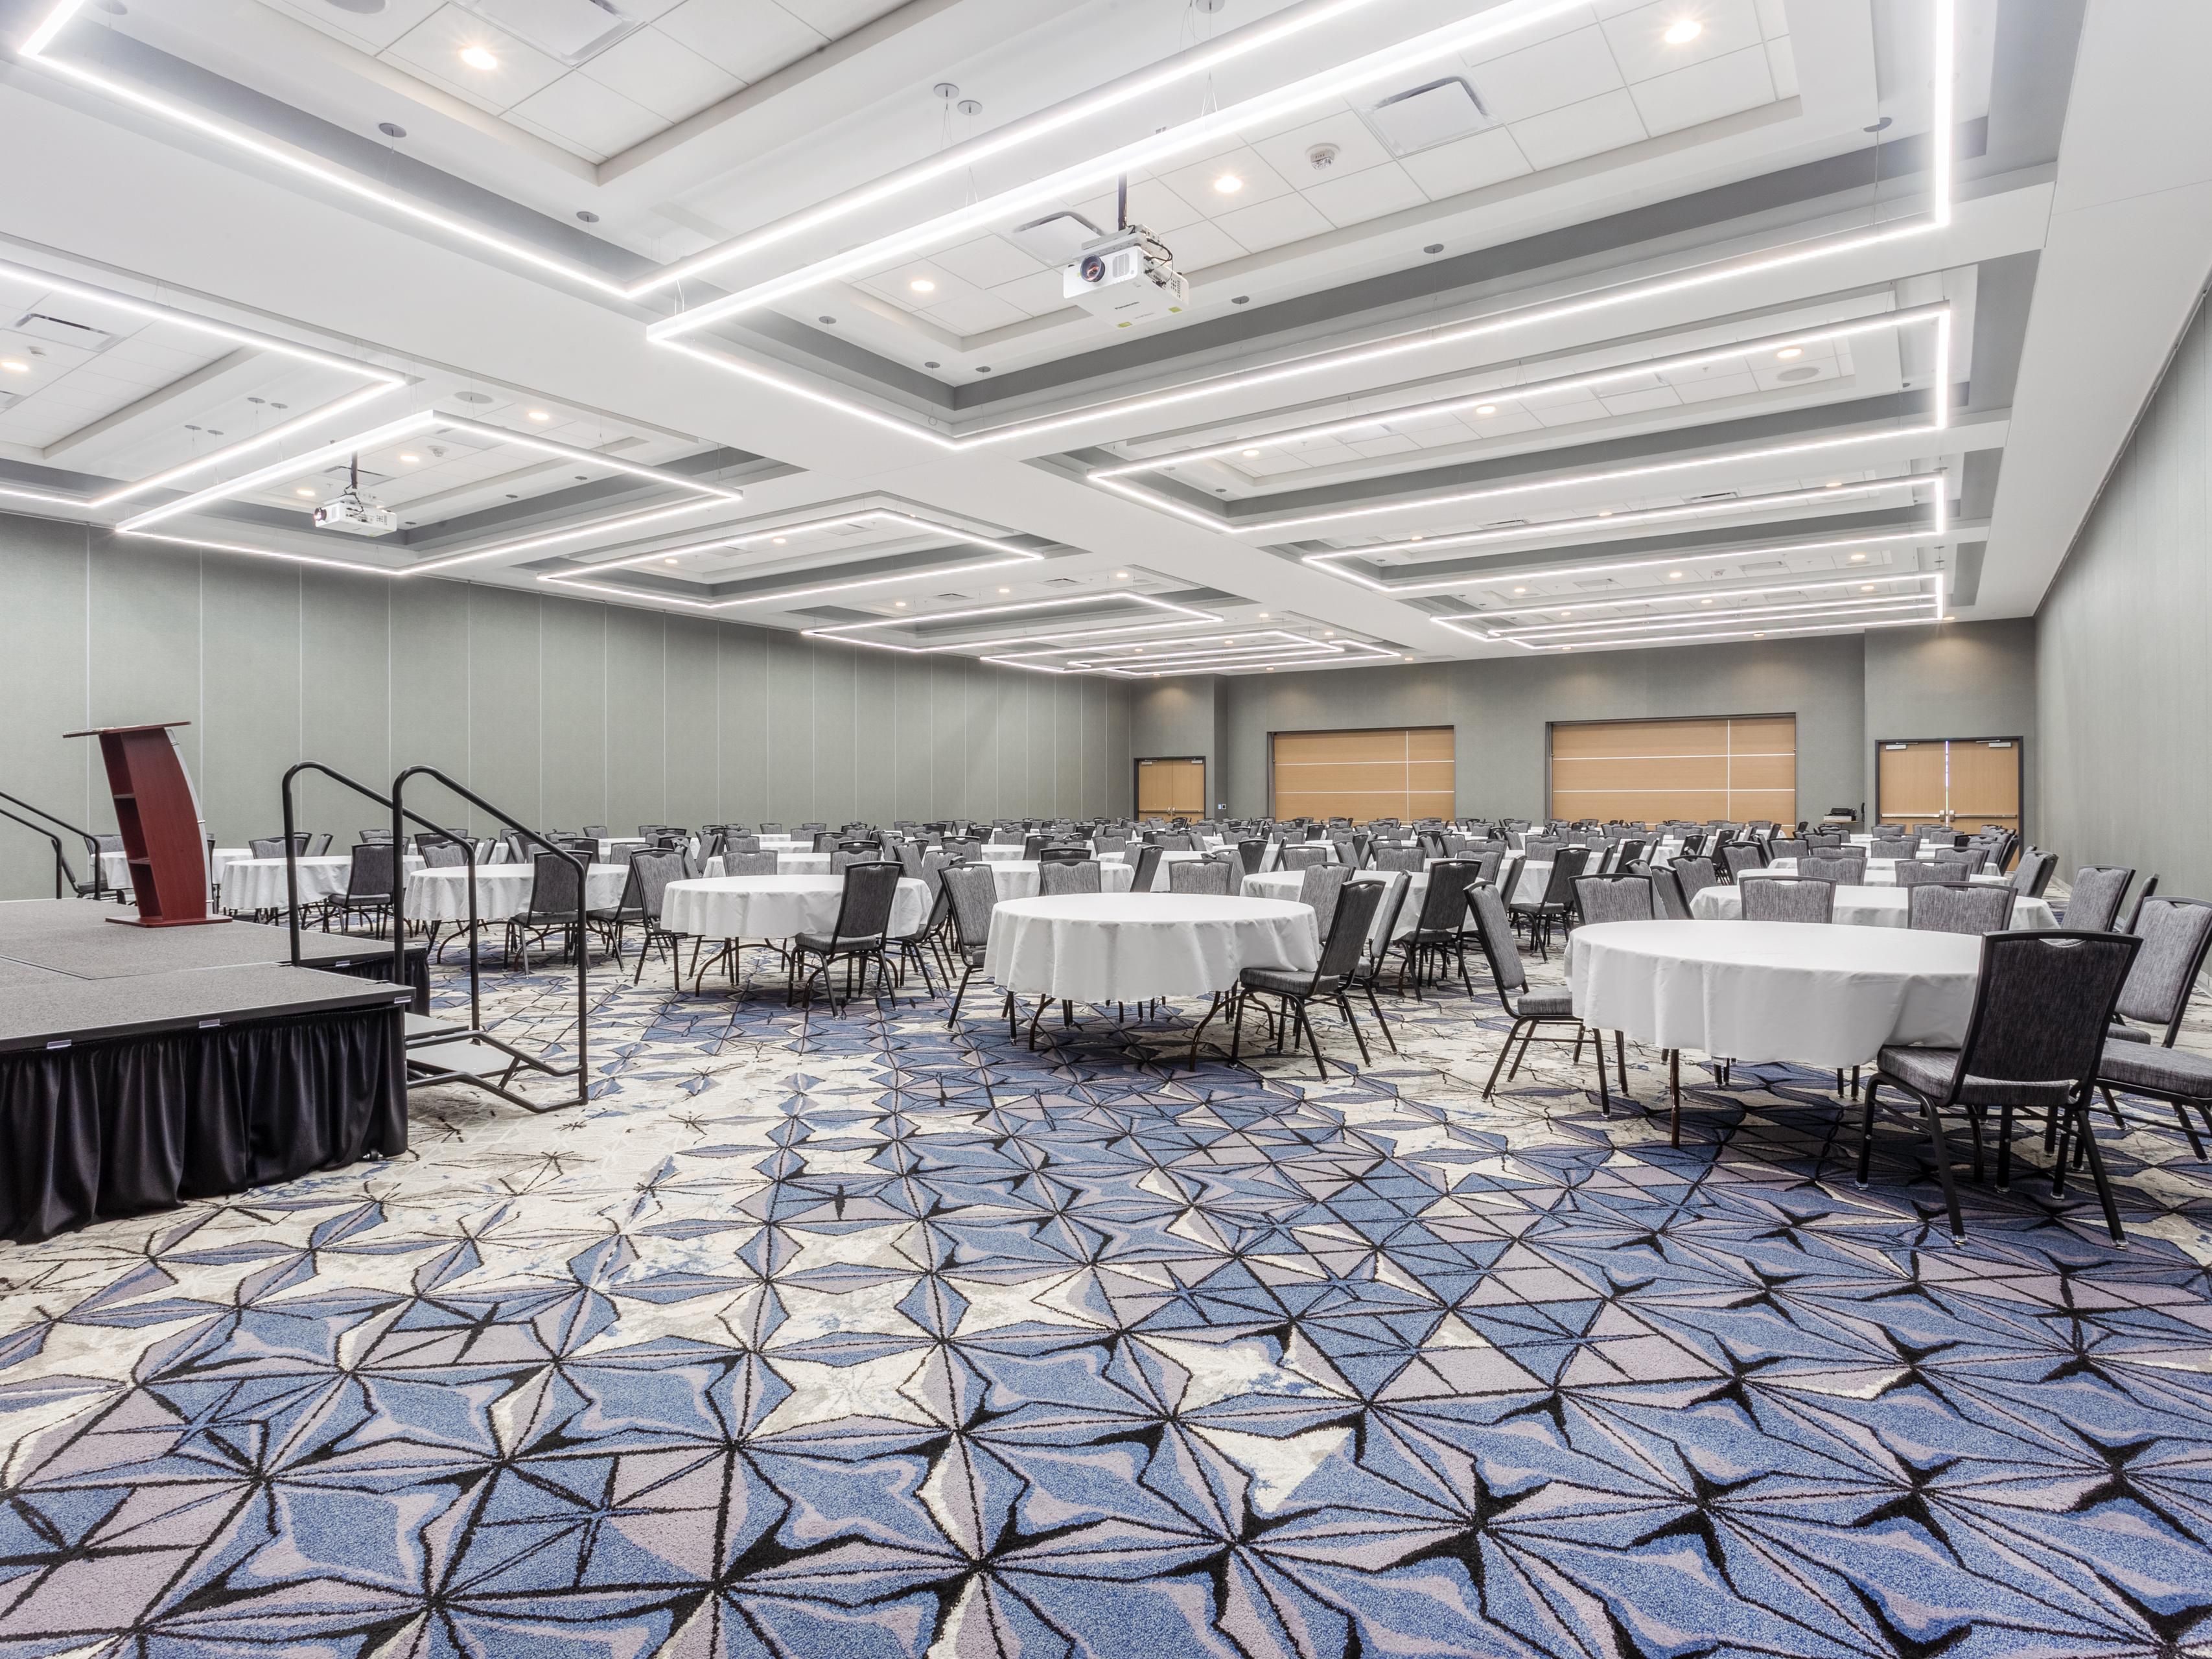 The best place to host a convention, conference, wedding, or business meeting, we offer 11 meeting spaces to choose from. Host celebrations in our Ballroom or schedule an impromptu meeting with a small group of colleagues. Our dedicated team of professionals will work with you to host your ideal event. 